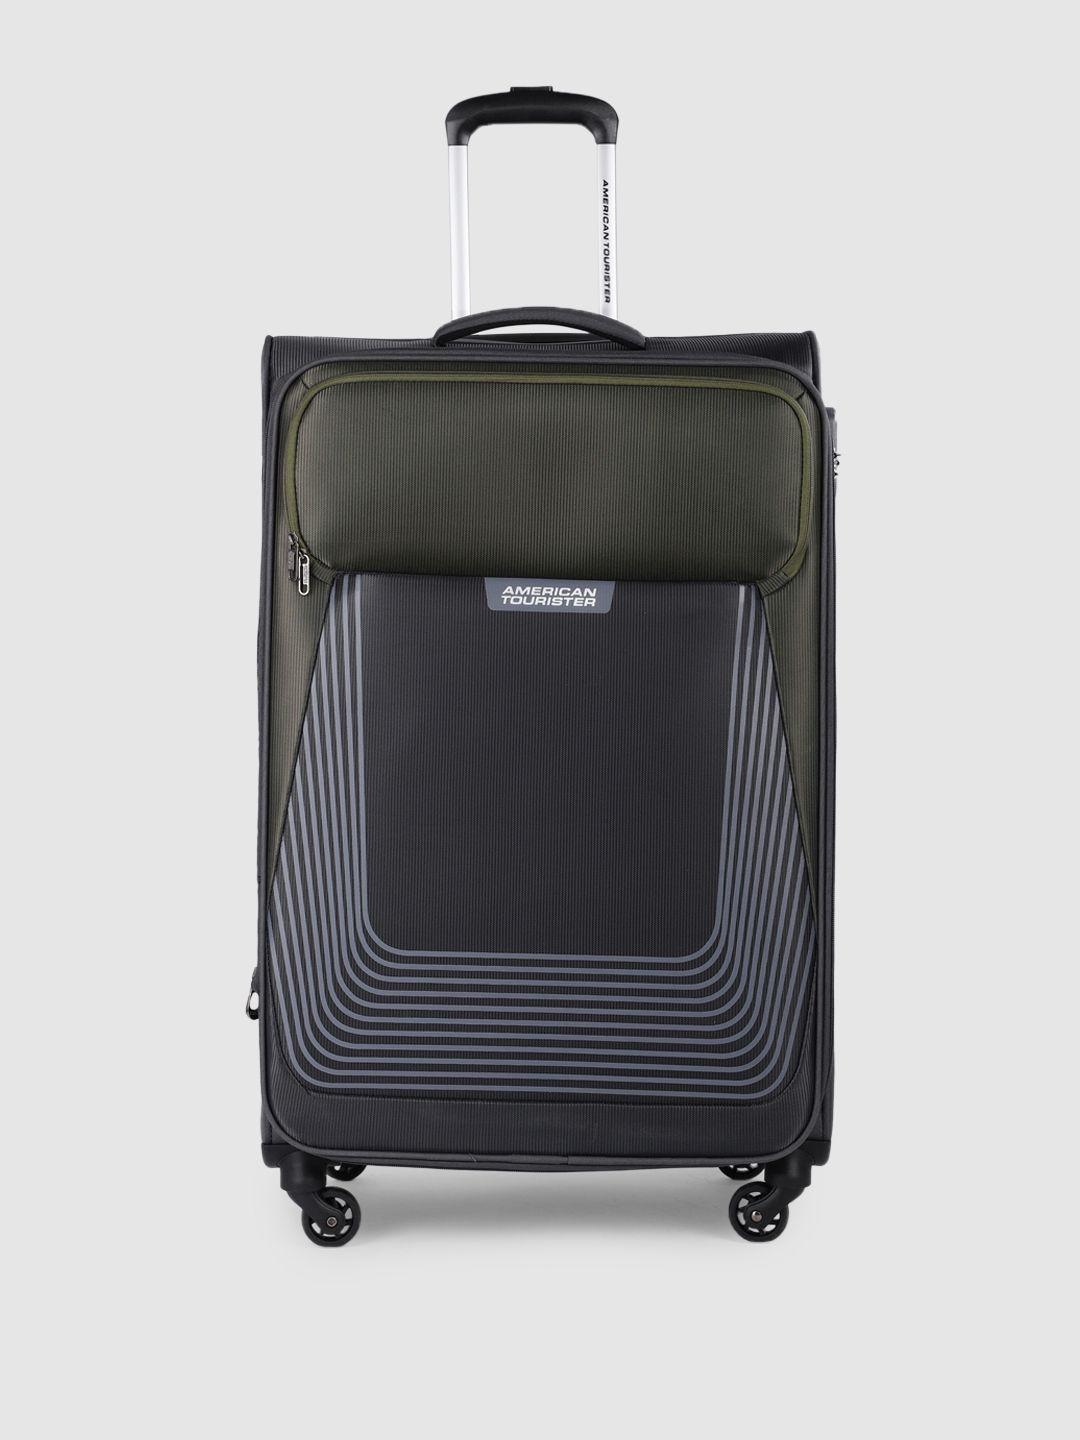 american-tourister-southside-lite-large-trolley-suitcase